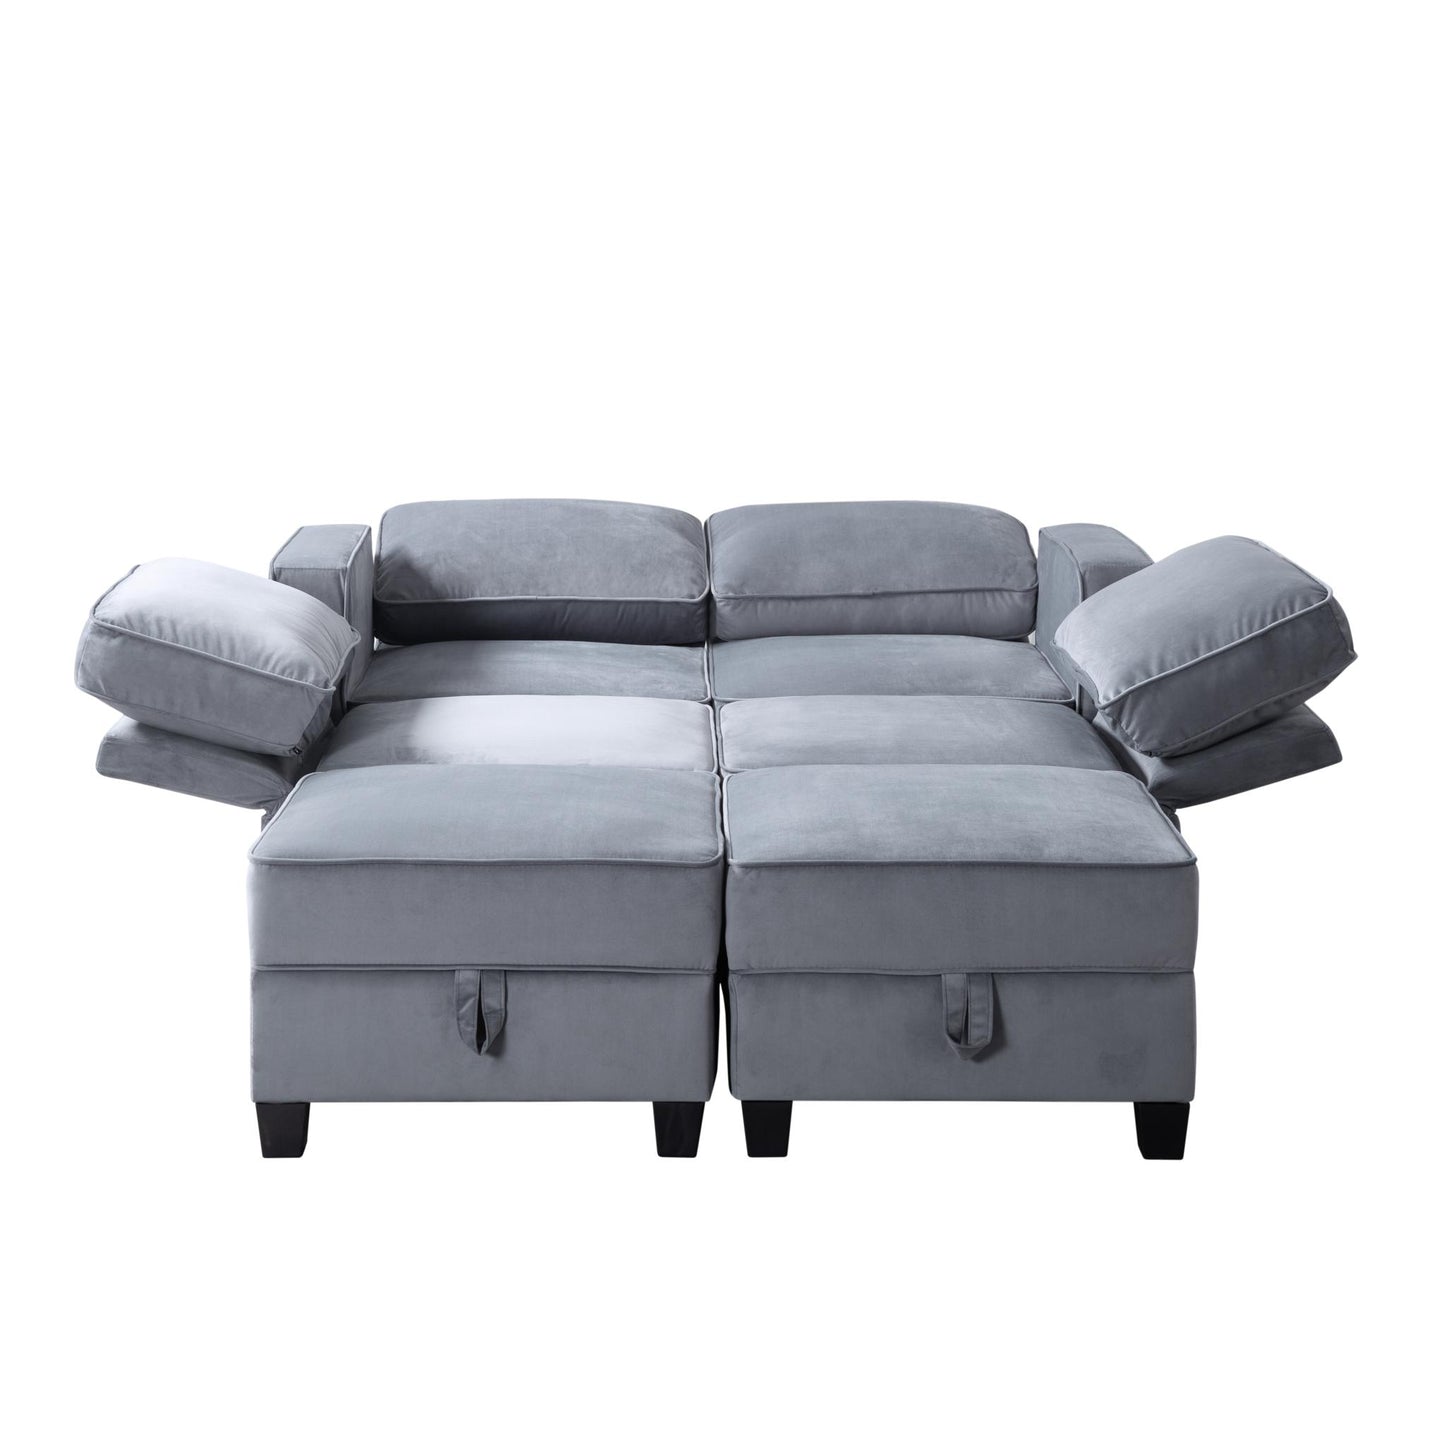 116” Square Arm Sectional Sofa